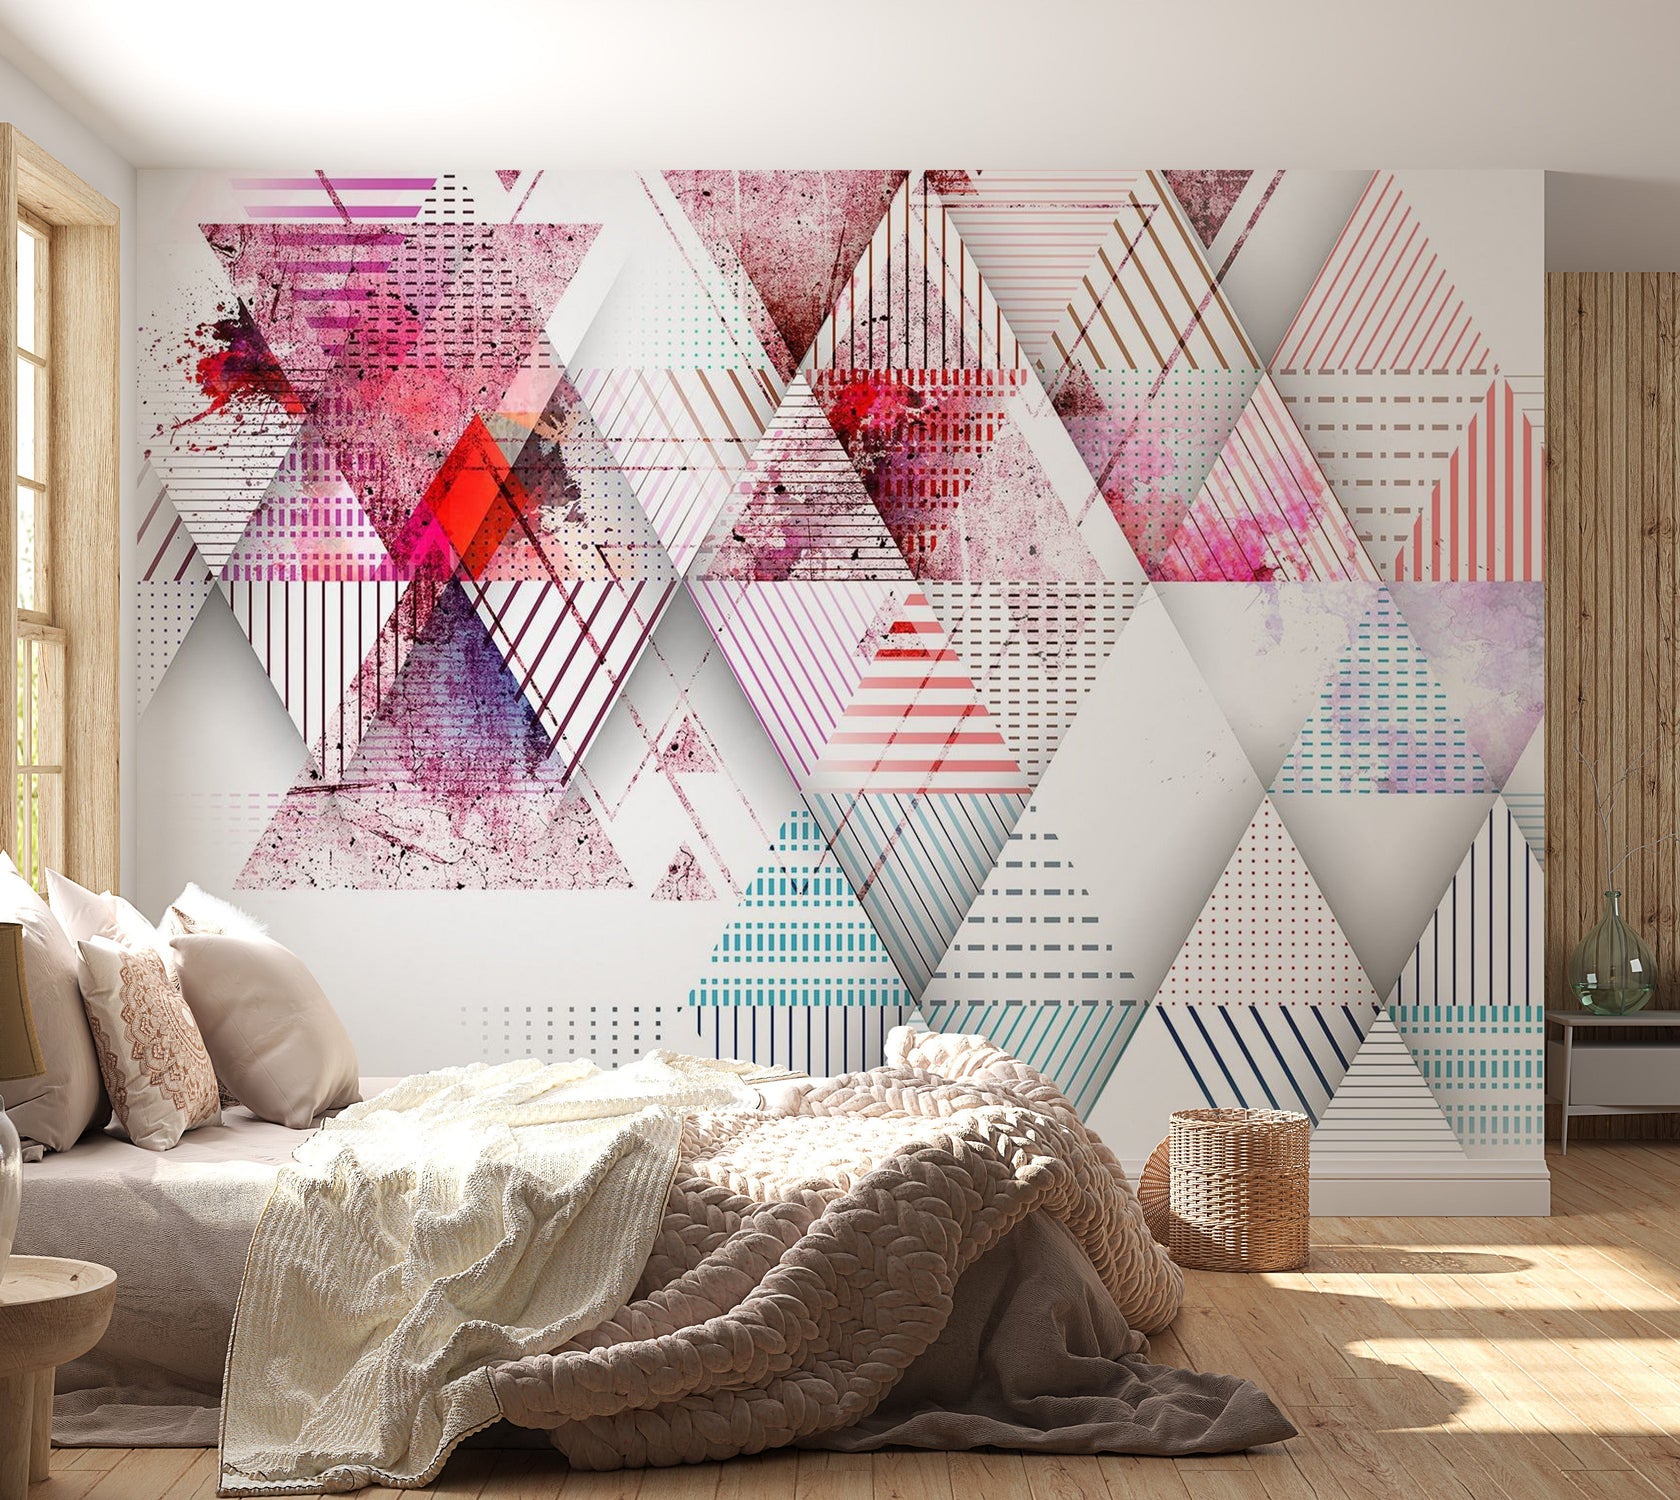 Peel & Stick Wall Mural - Abstract Geometric Triangle Art - Removable Wall Decals